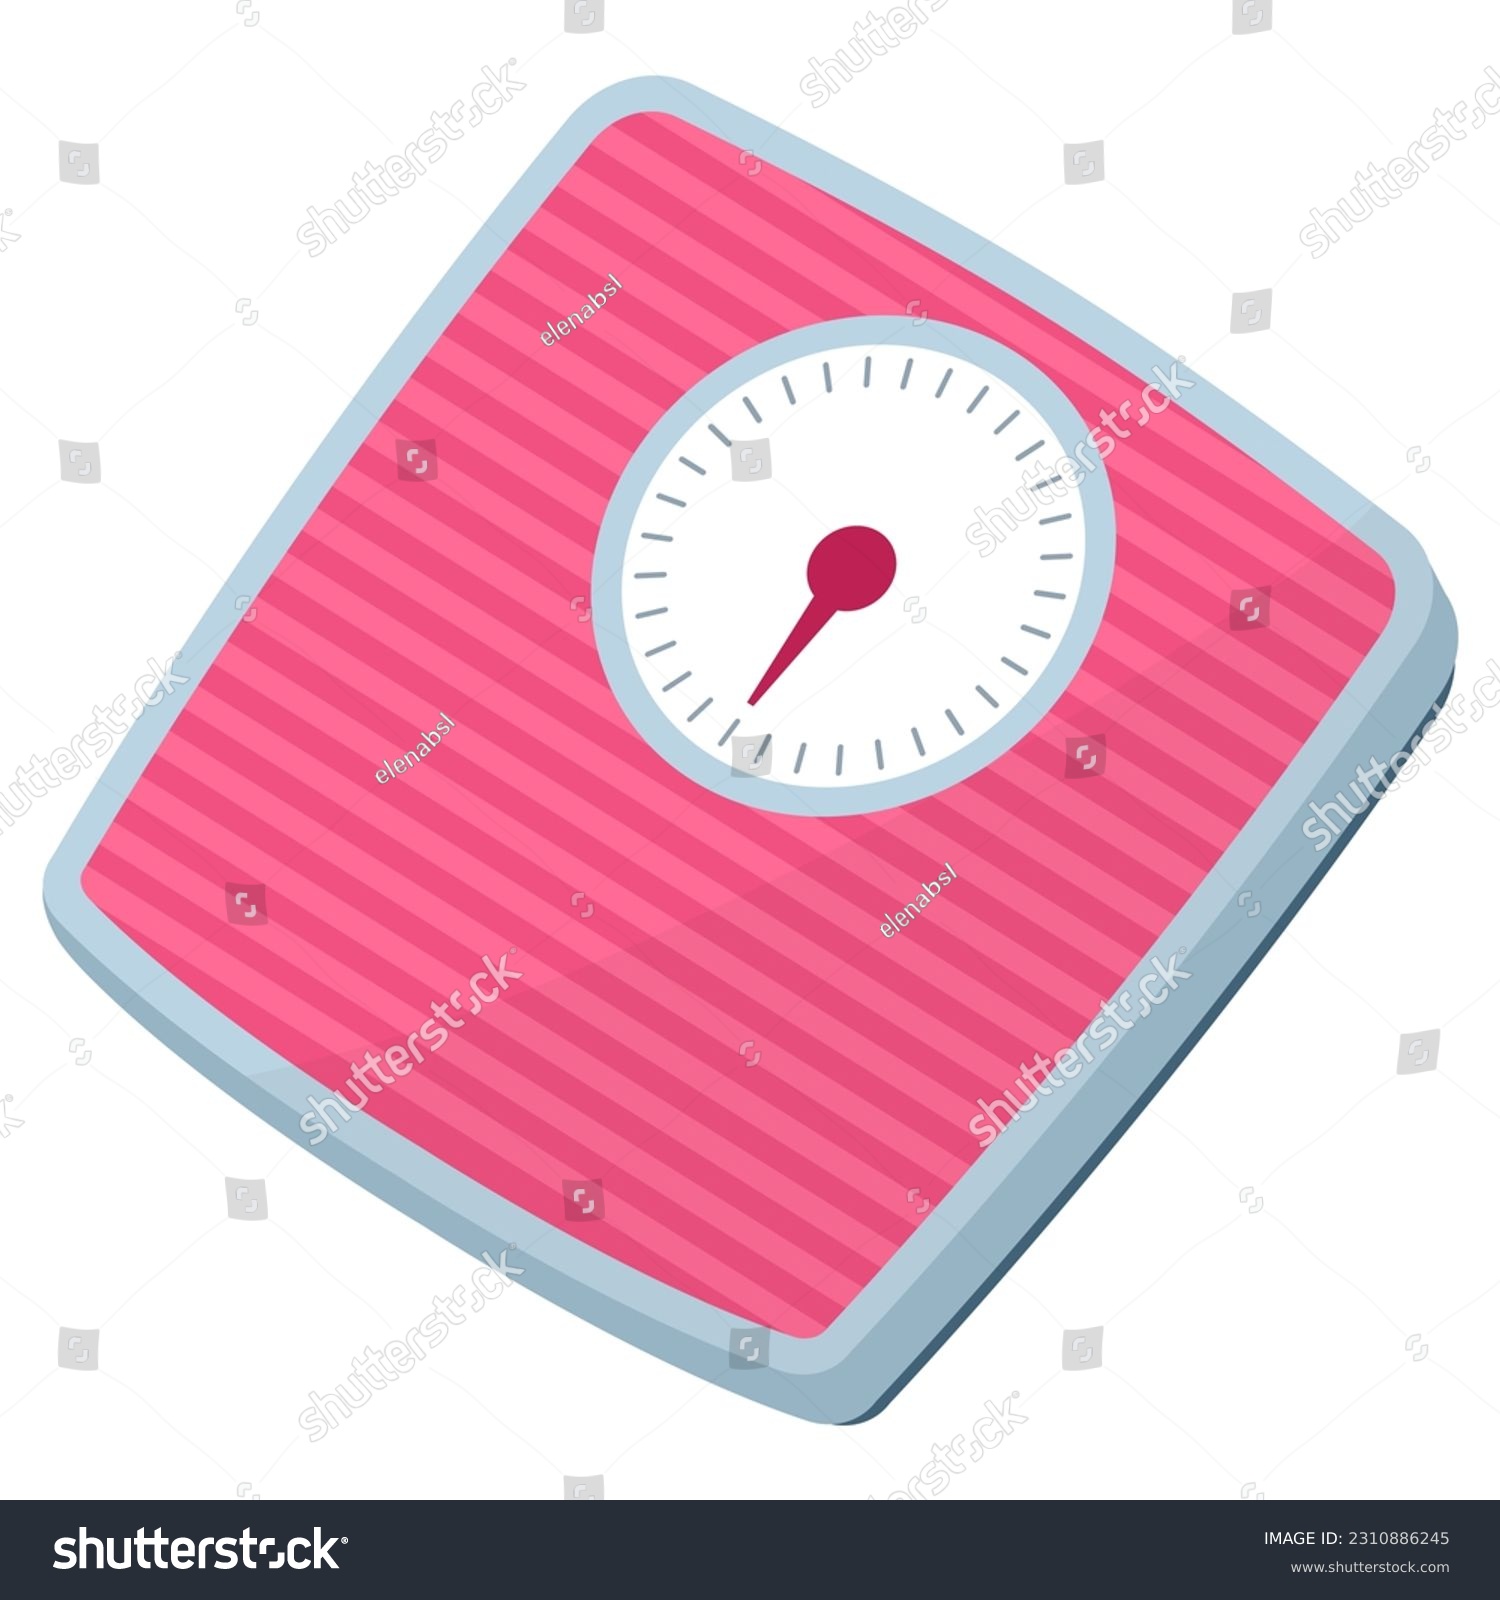 SVG of Analog weight scale isolated: weight loss and burning calories concept svg